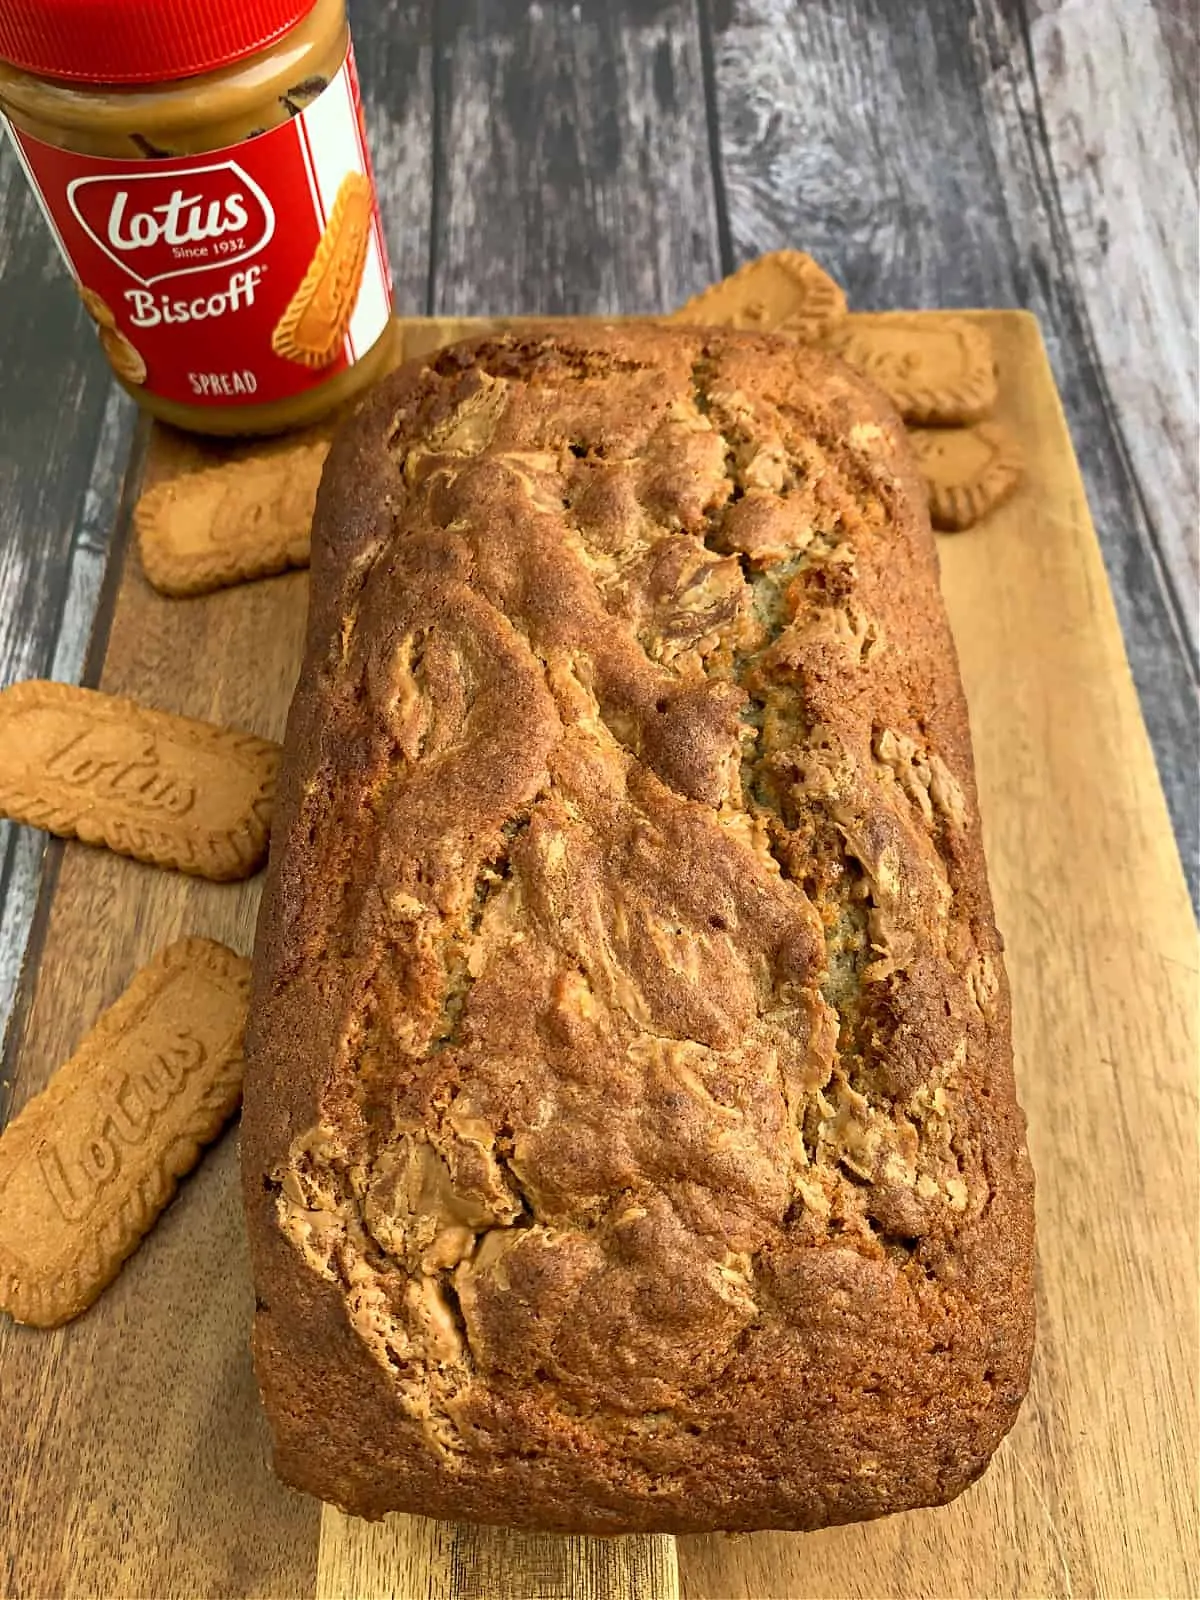 Banana bread on a wooden board with Biscoff biscuits and spread to the side.